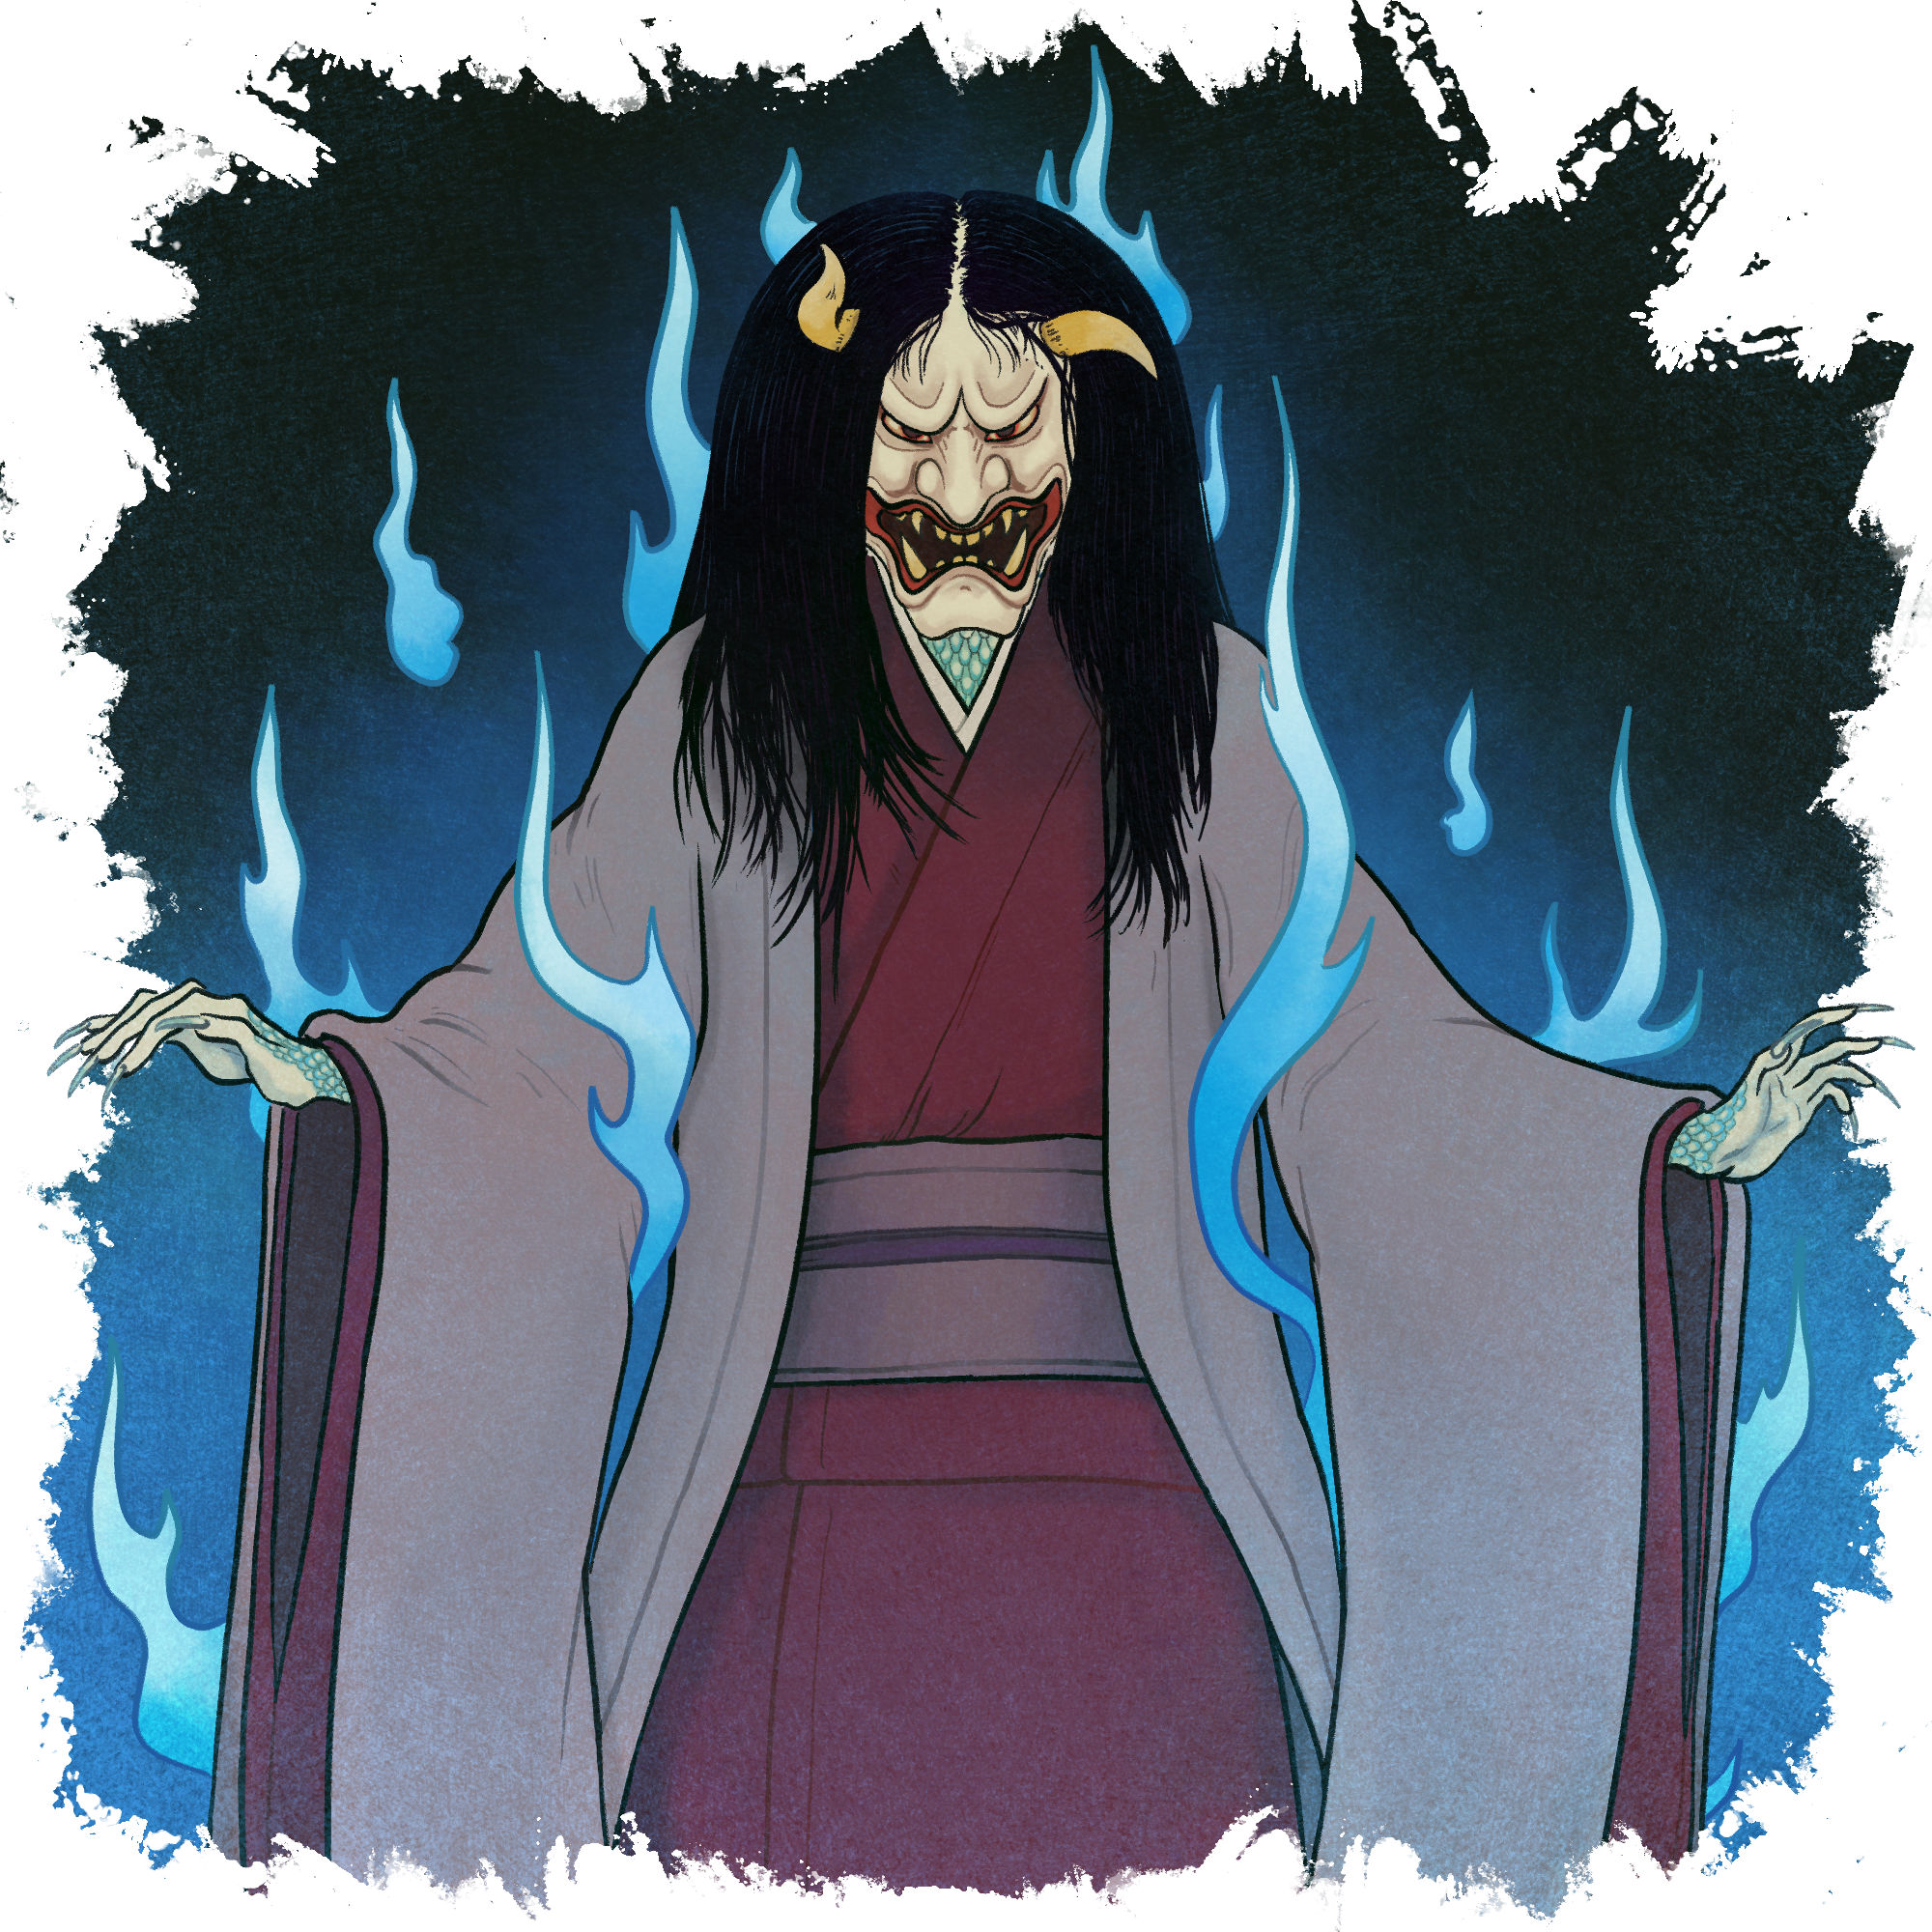 A demon goddess in a kimono, with fangs and horns, wreathed in blue flames.